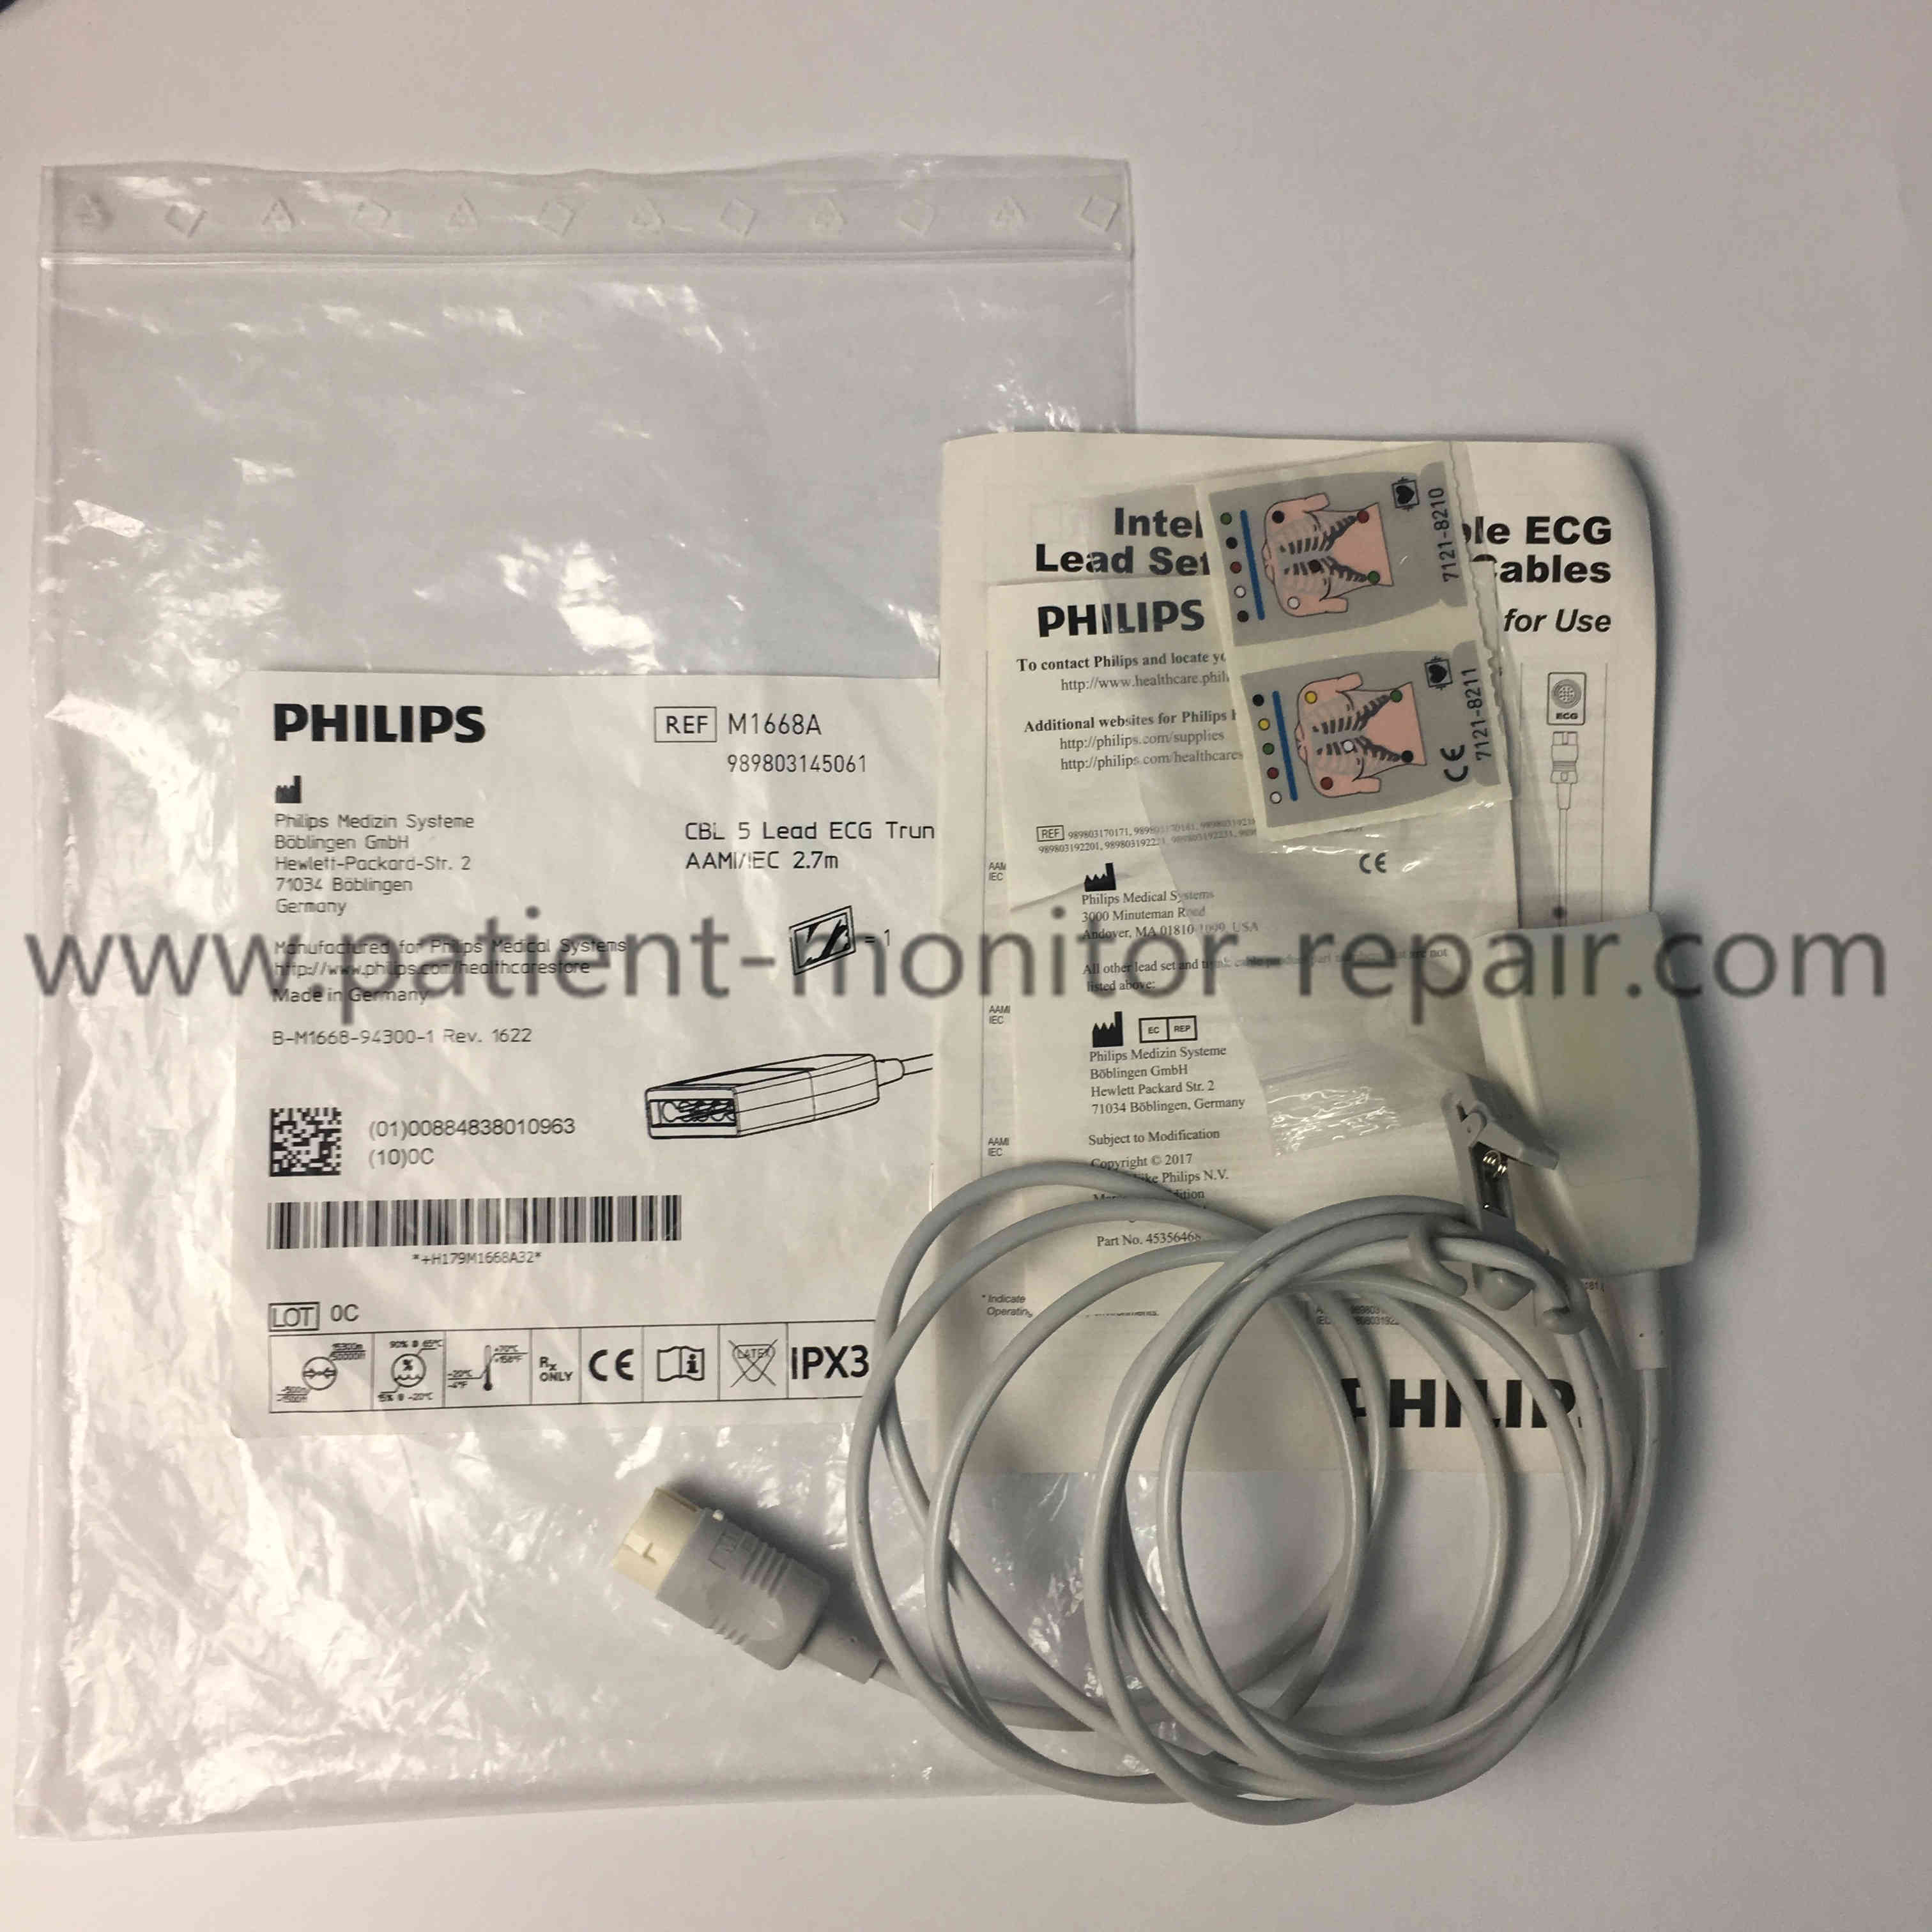 Philips M1668A 5-lead ECG Trunk Cable AAMI/IEC 2.7m 12-pin 989803145061 